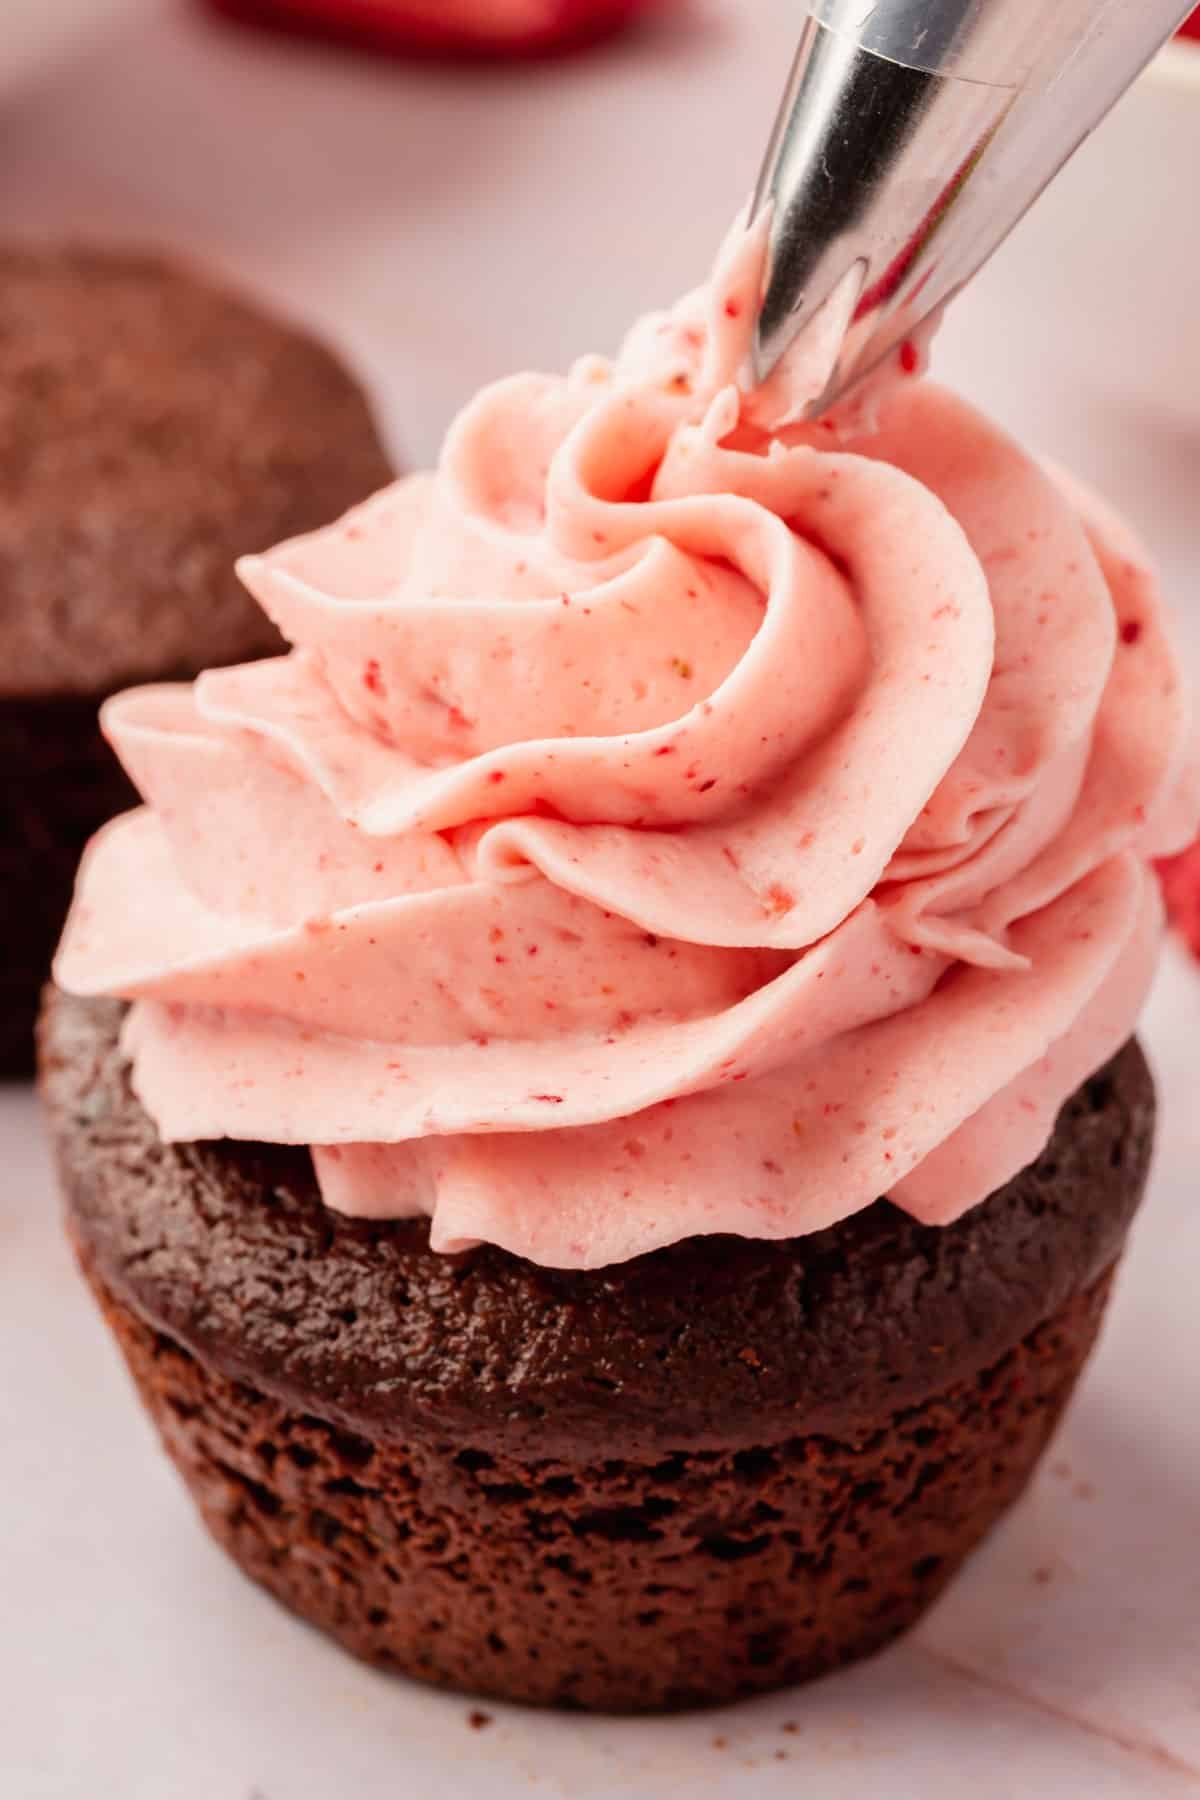 Strawberry frosting in the process of being piped on top of a chocolate cupcake.